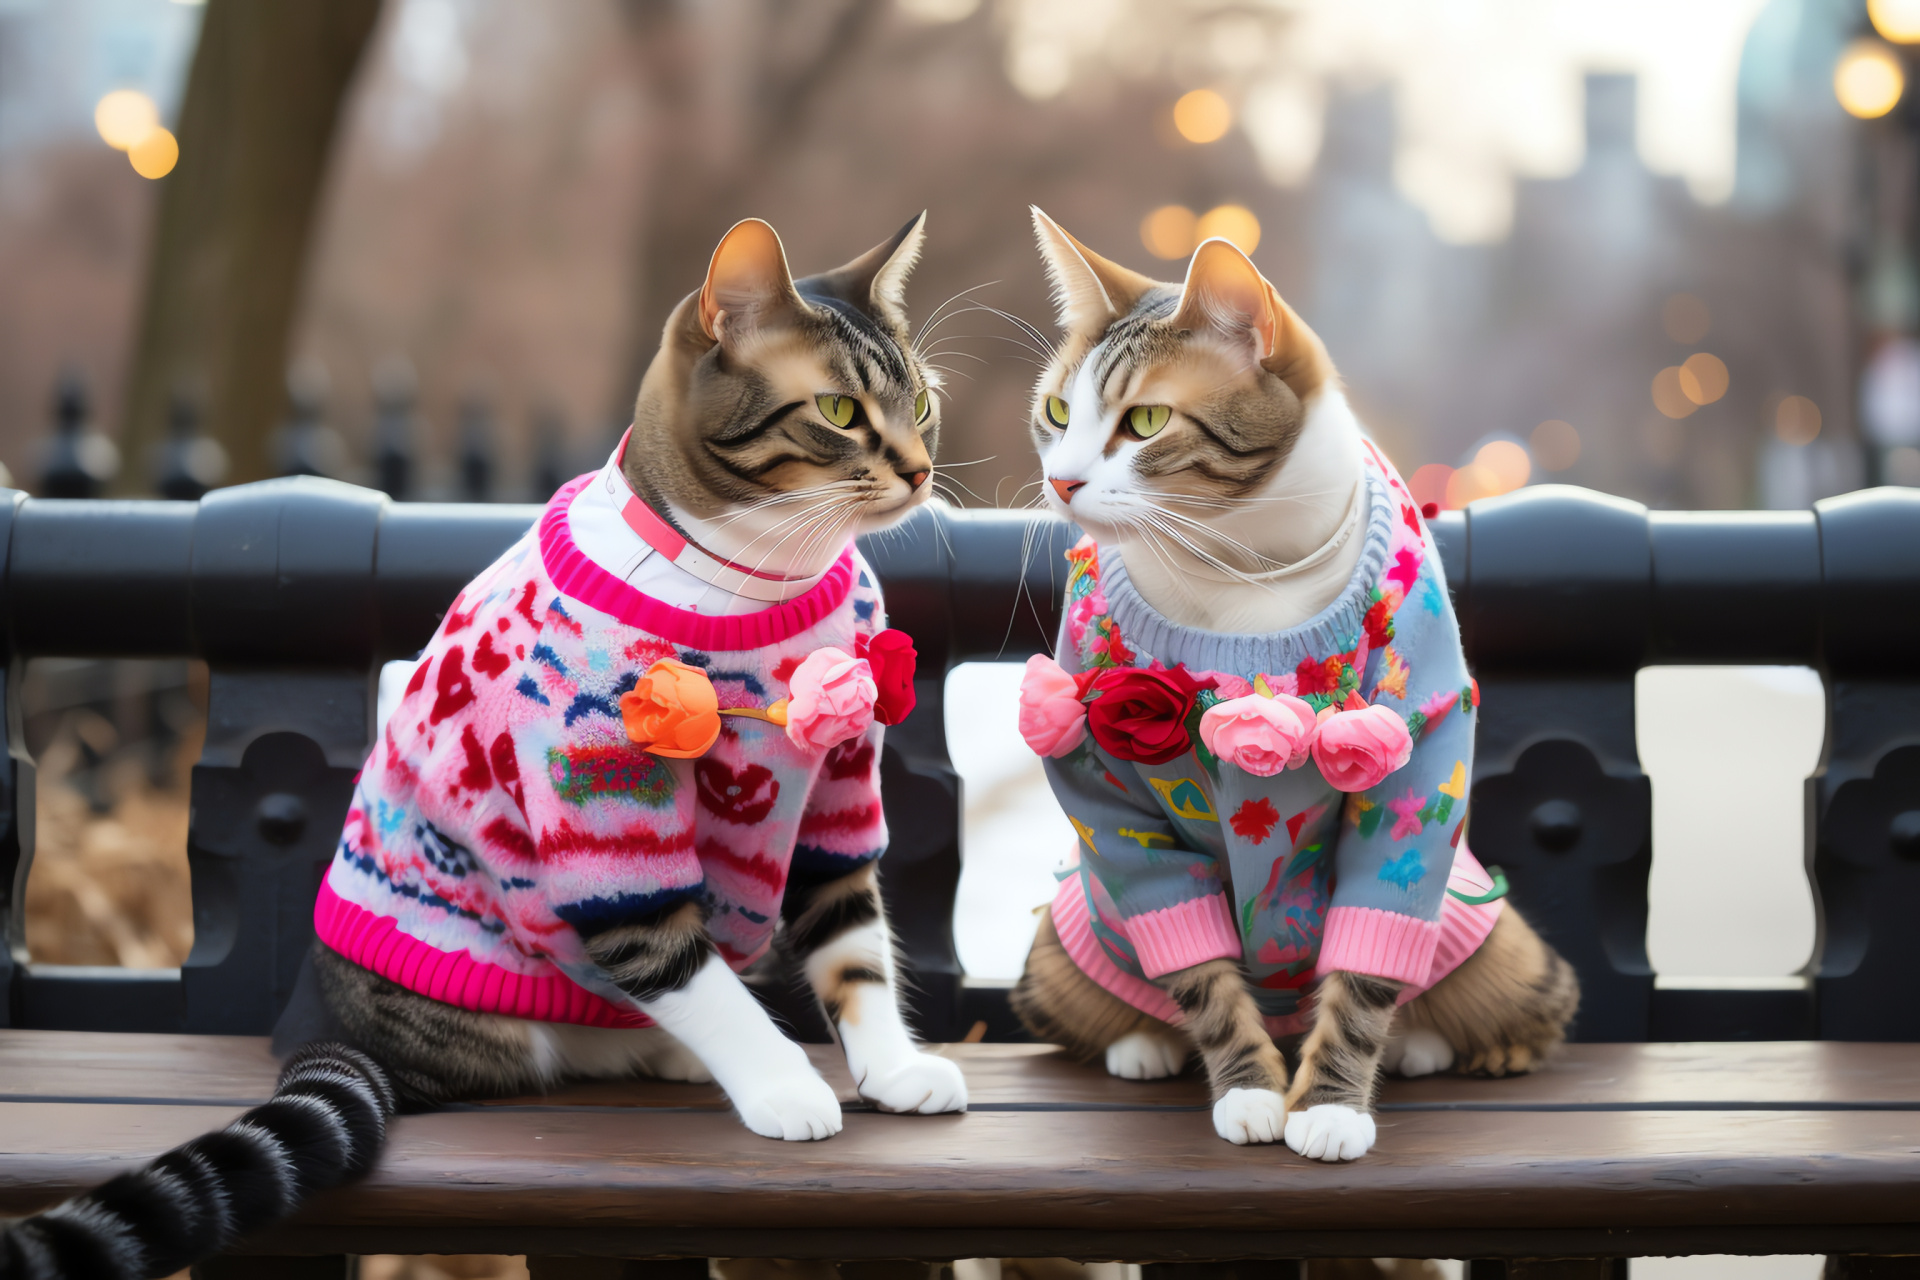 Valentine's outdoor rendezvous, park seating for feline duet, heart-themed woolen outfits, picturesque botanical setting, floral Valentine's display, HD Desktop Wallpaper